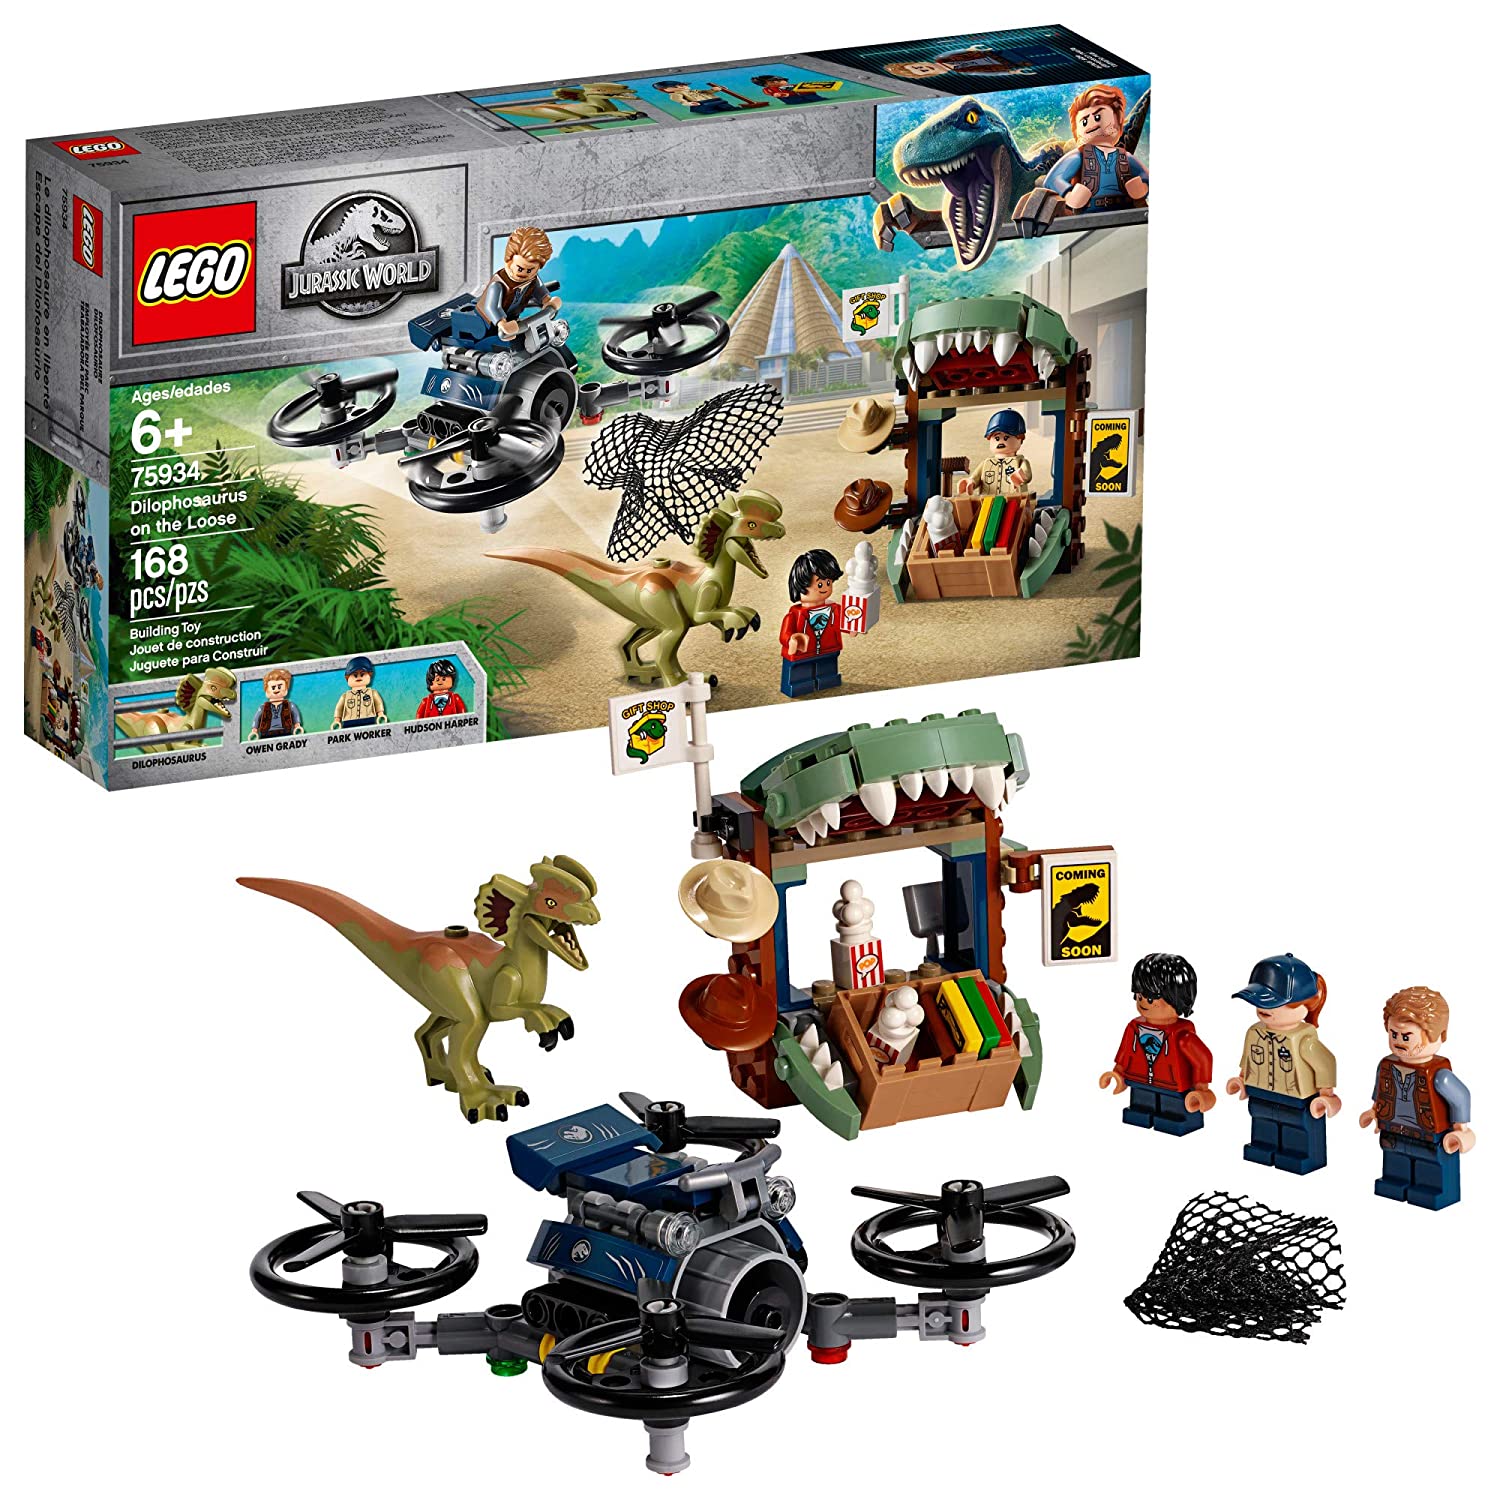 Top 8 Best Lego Dinosaurs Set Reviews in 2022 3